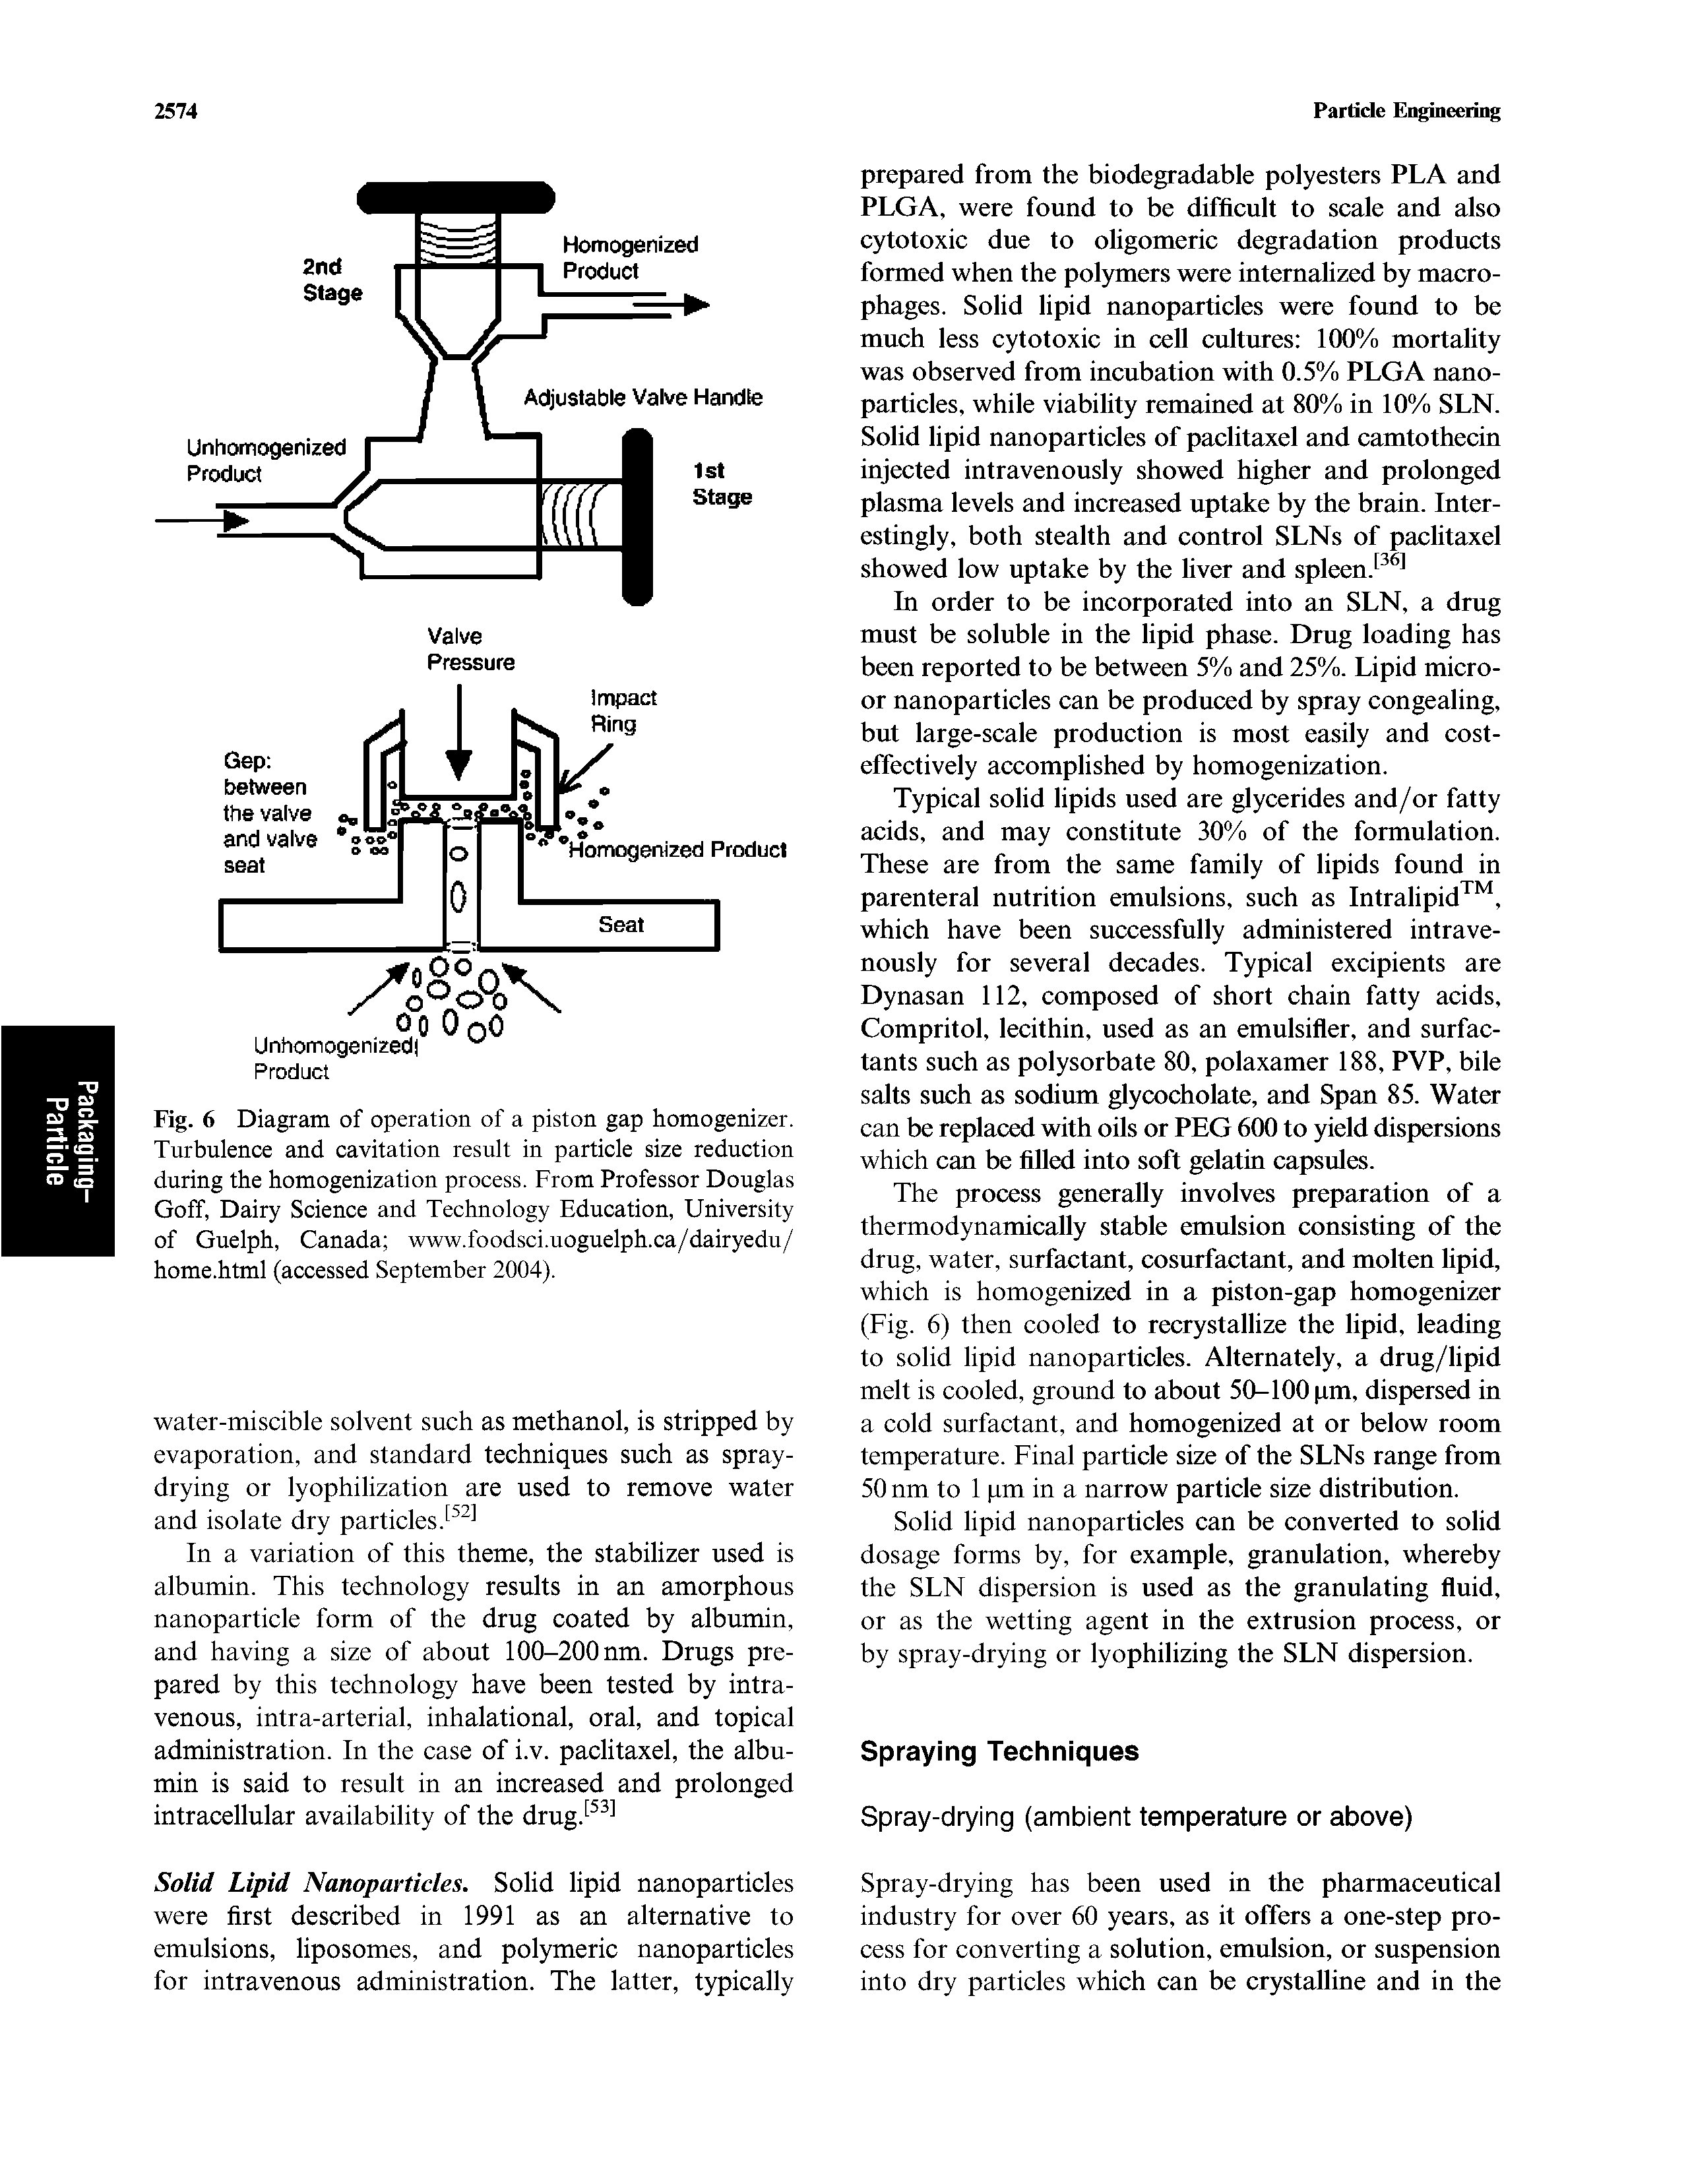 Fig. 6 Diagram of operation of a piston gap homogenizer. Turbulence and cavitation result in particle size reduction during the homogenization process. From Professor Douglas Goff, Dairy Science and Technology Education, University of Guelph, Canada www.foodsci.uoguelph.ca/dairyedu/ home.html (accessed September 2004).